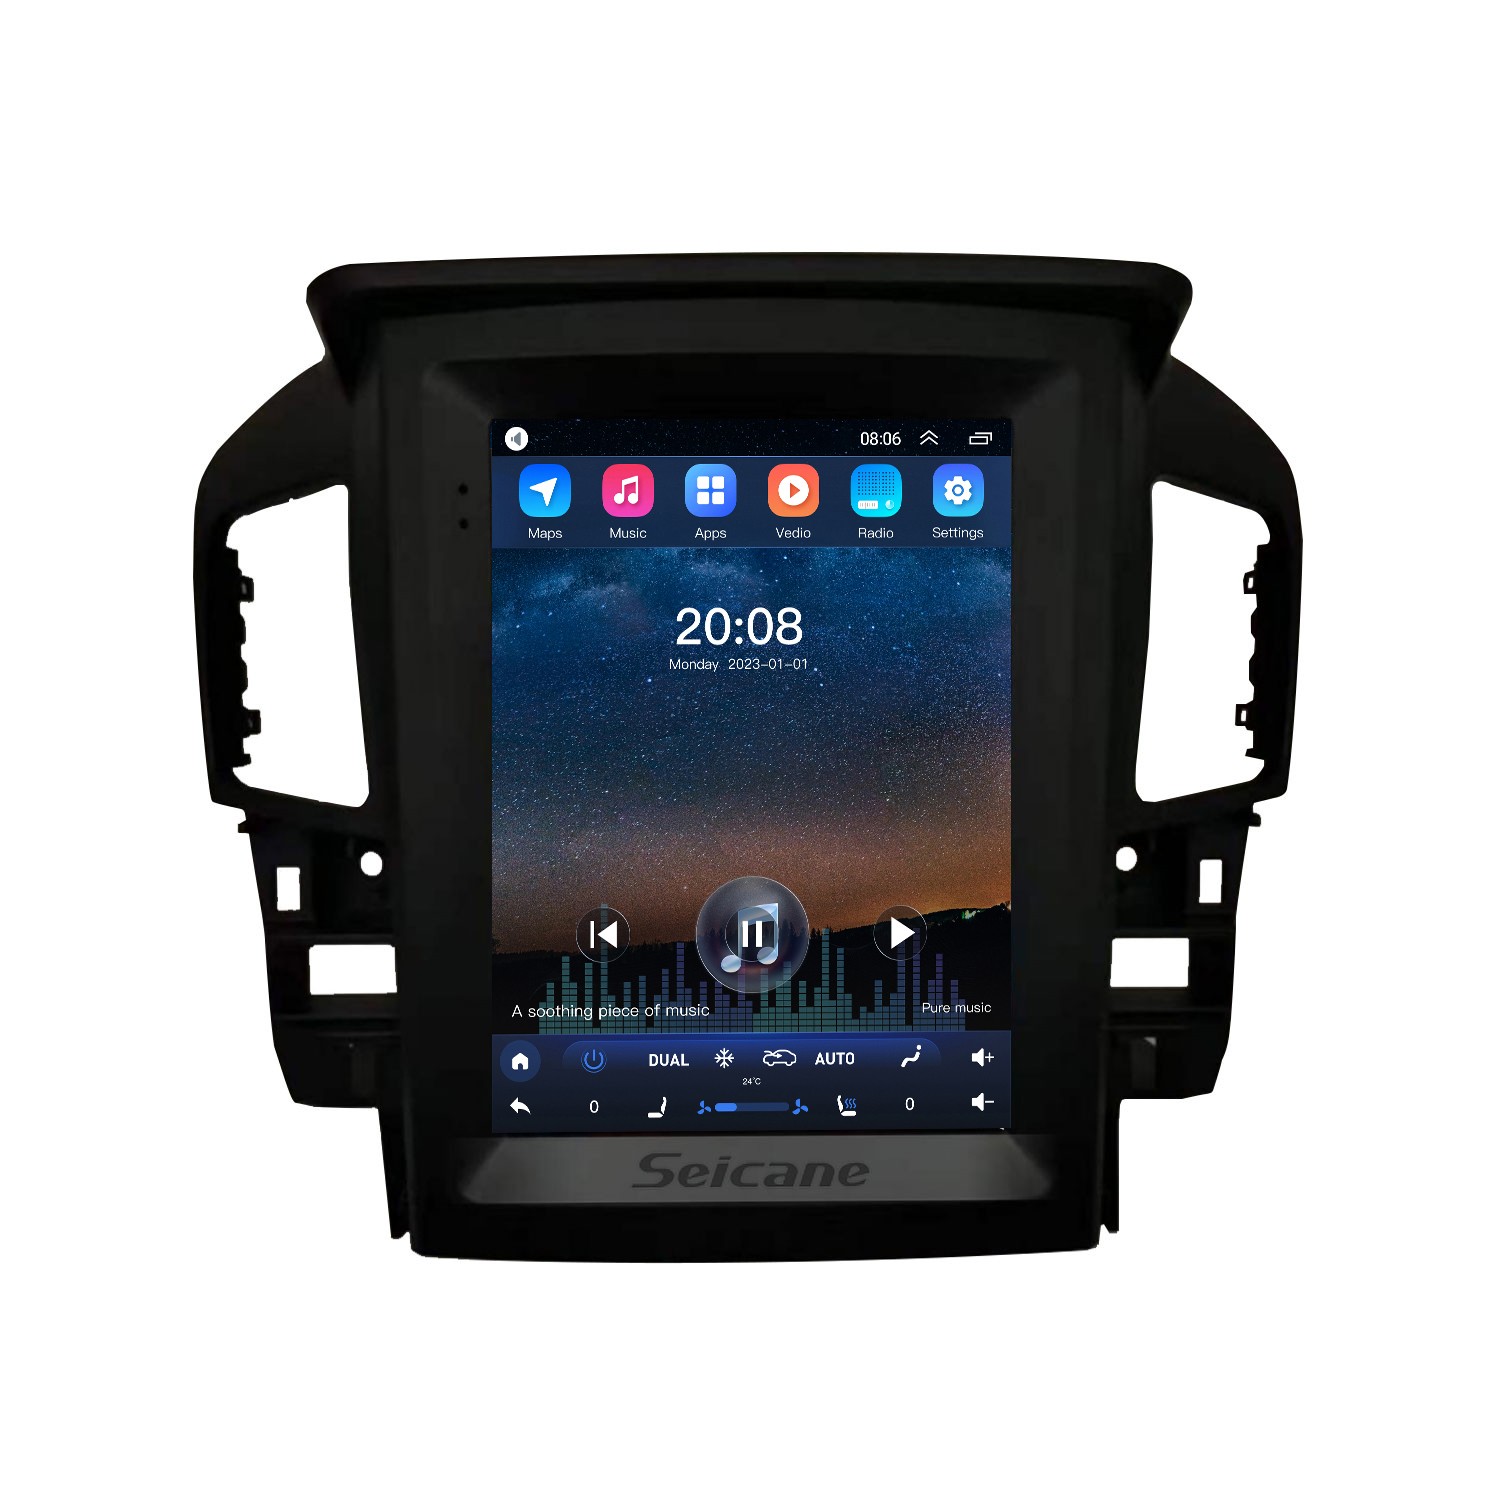 Android Car Radio Gps Autoradio 2 Din 9.7'' Vertical Screen Mp5 Player With  Bluetooth Wifi Stereo Receiver Tape Recorder